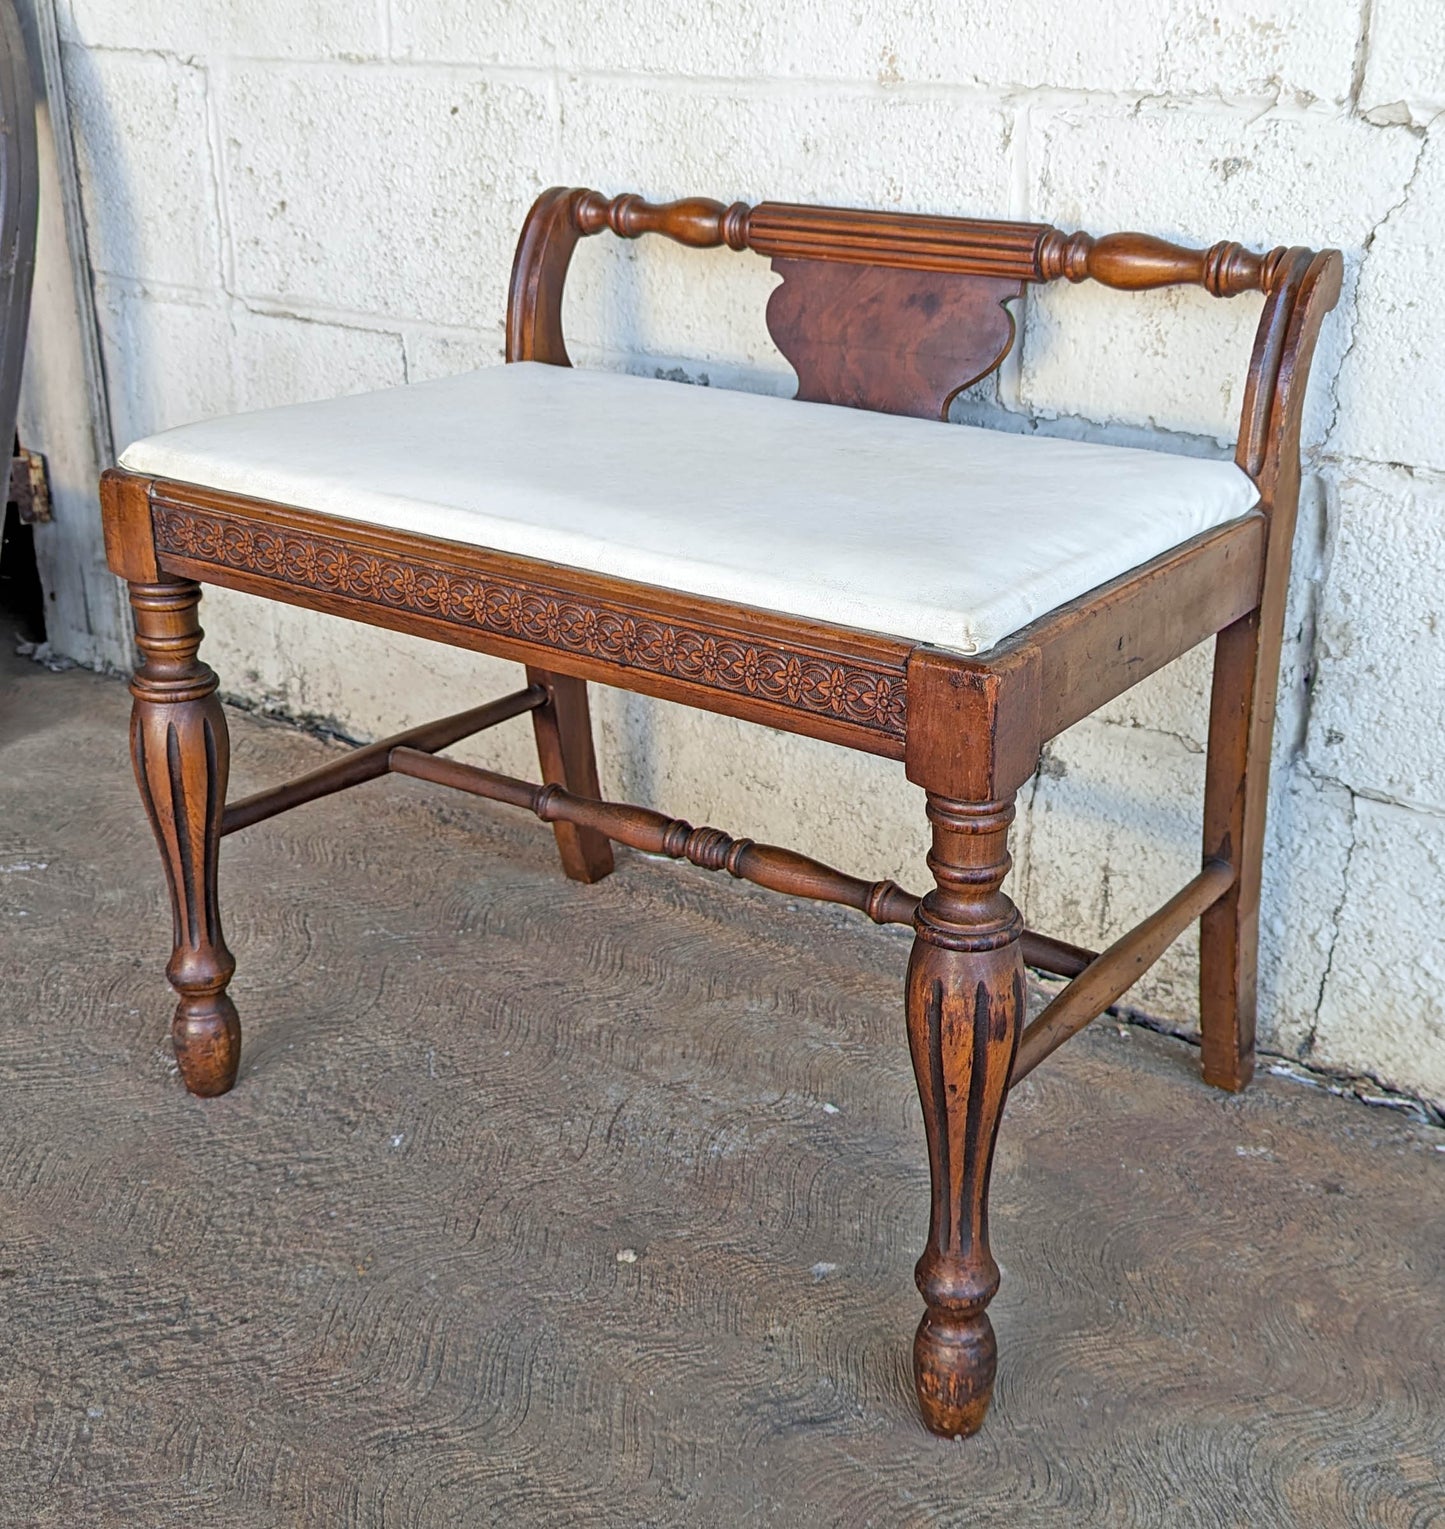 Antique Vintage Old Victorian Carved SOLID Wood Wooden Bench Settee Chair Stool White Vinyl Fabric Seat